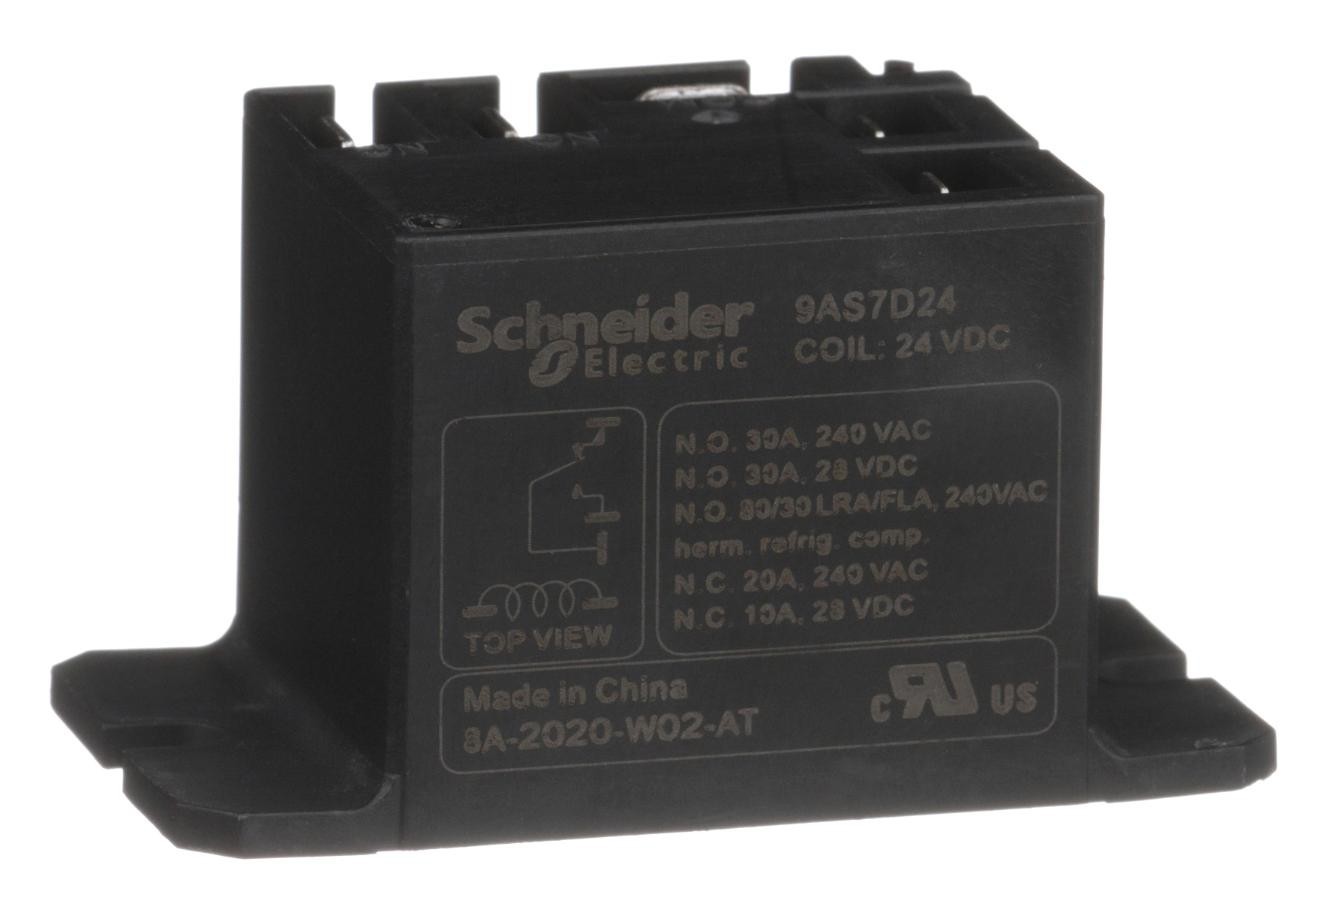 Schneider Electric/legacy Relay 9As7D24 Power Relay, Spdt, 24Vdc, 30A, Panel